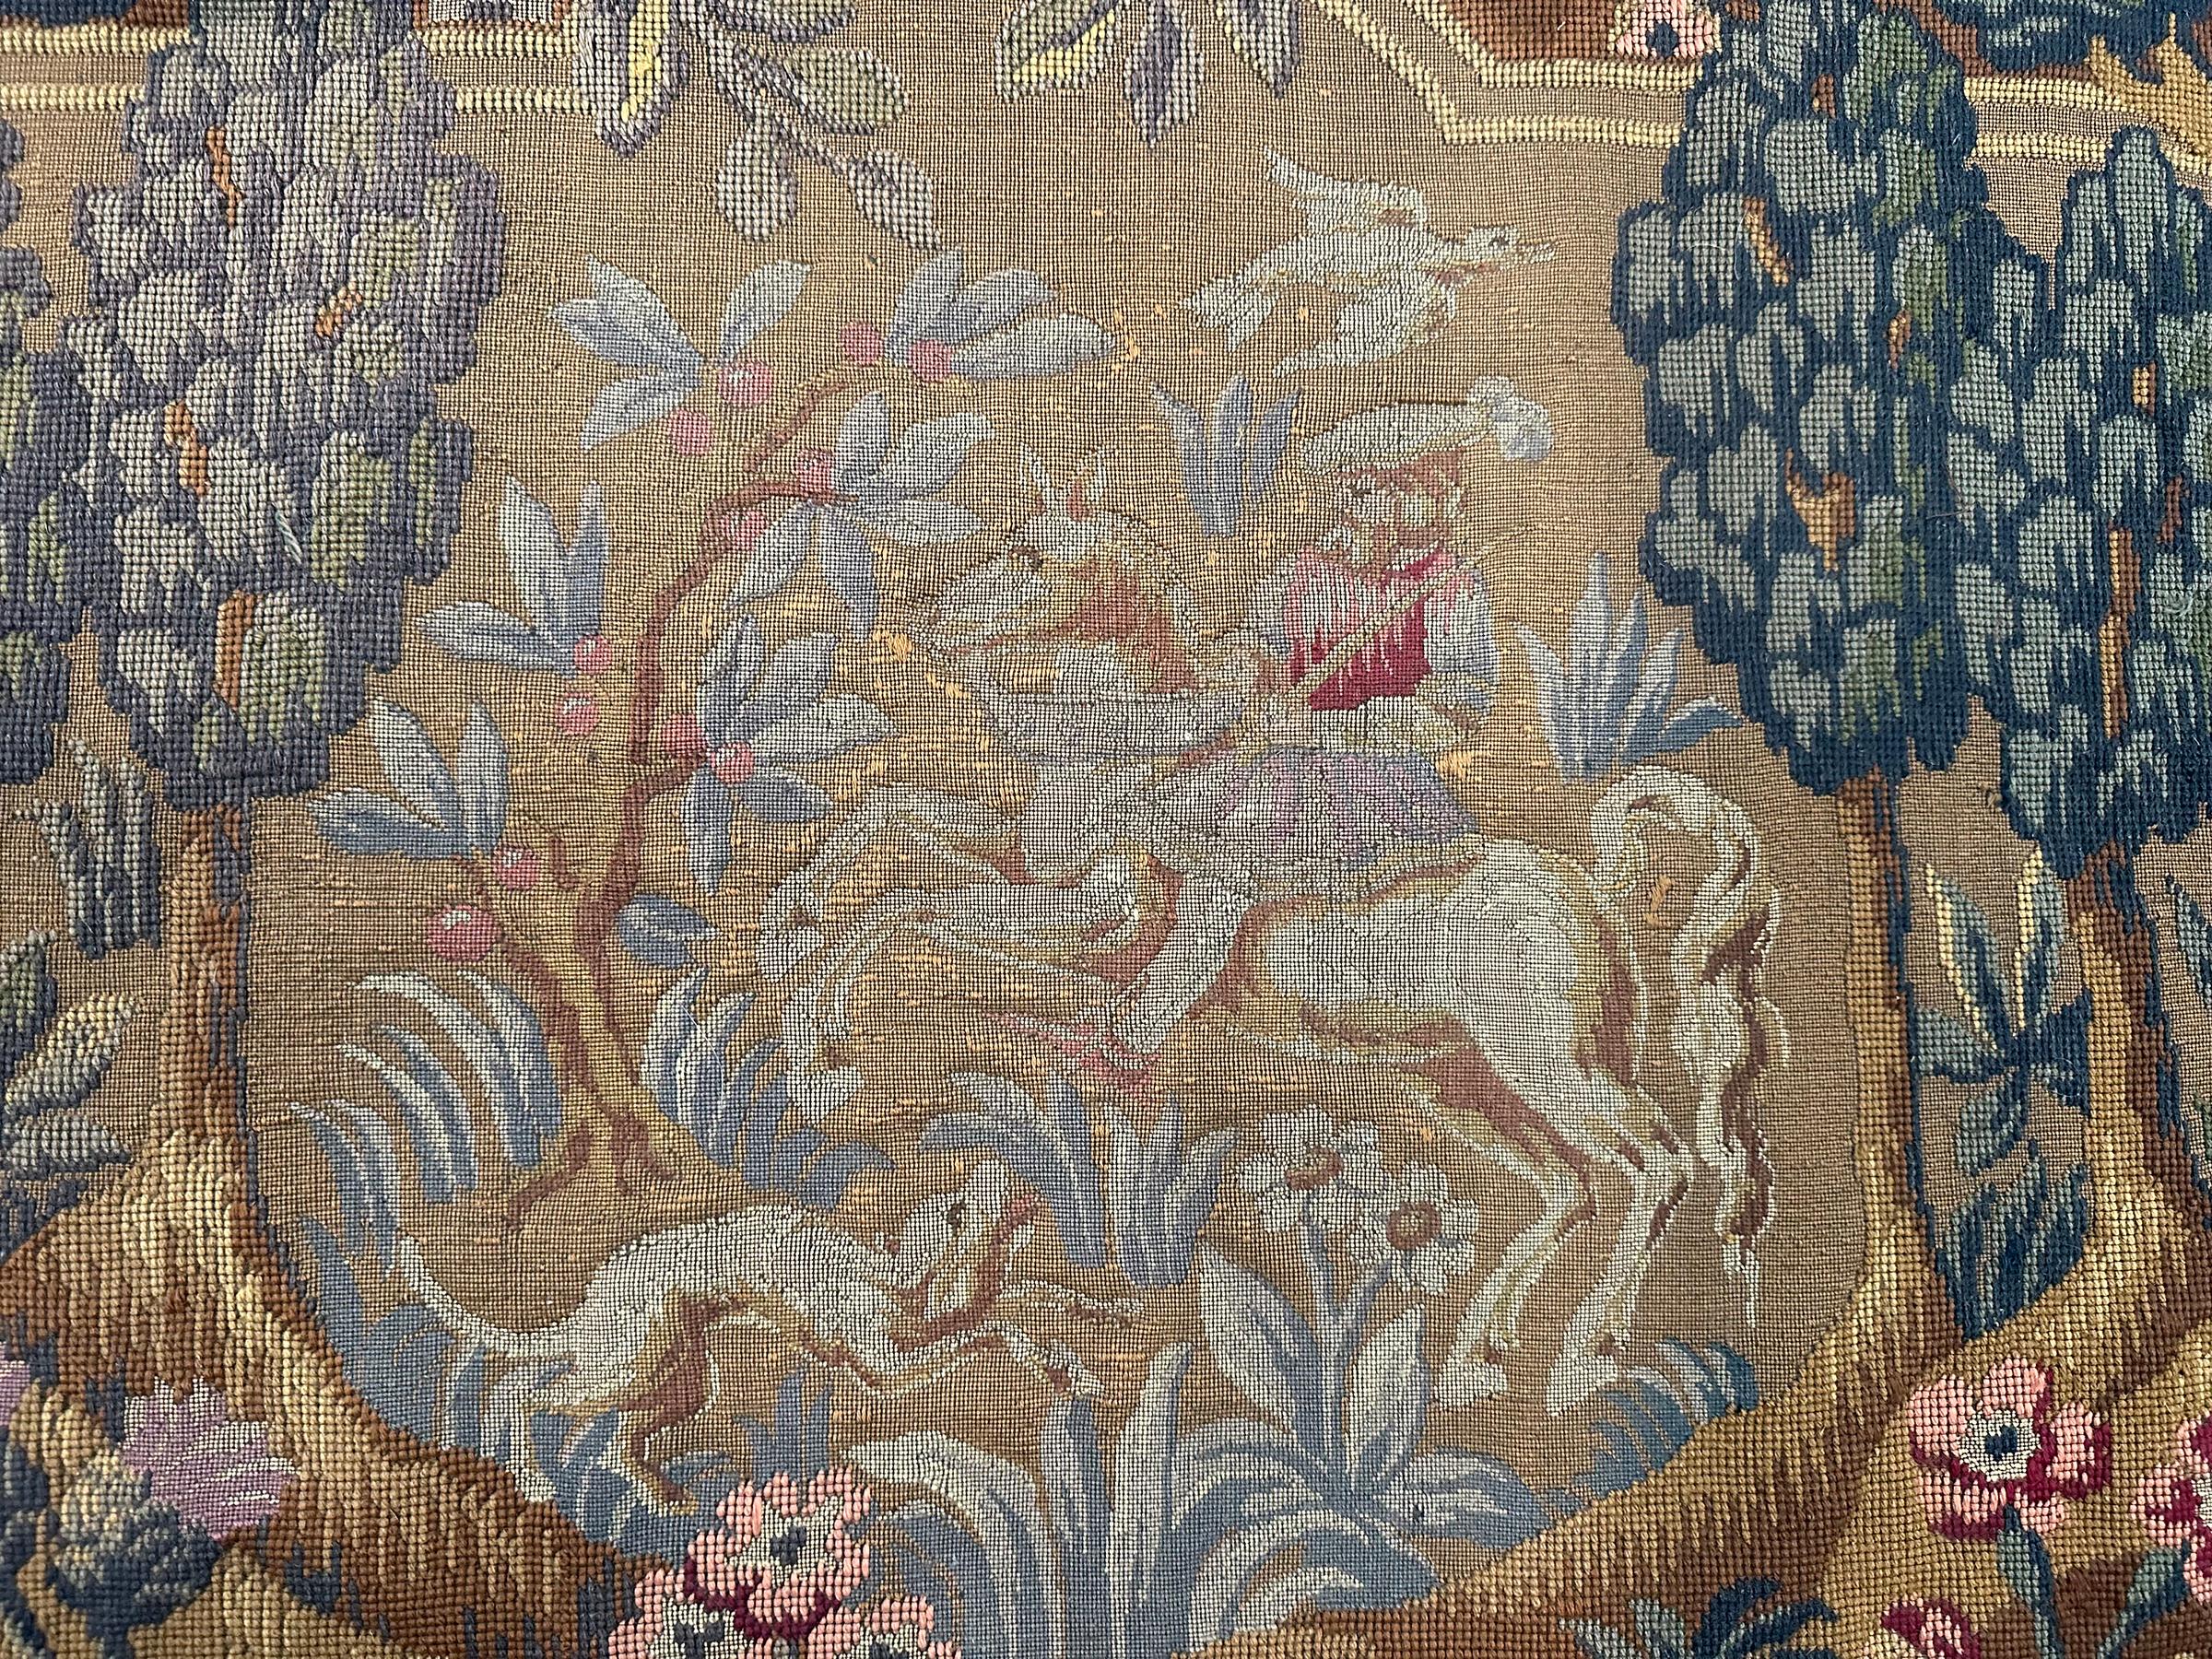 1920 Antique English Needlepoint Tapestry Wool & Silk 3x5 82cm x 158cm In Good Condition For Sale In New York, NY